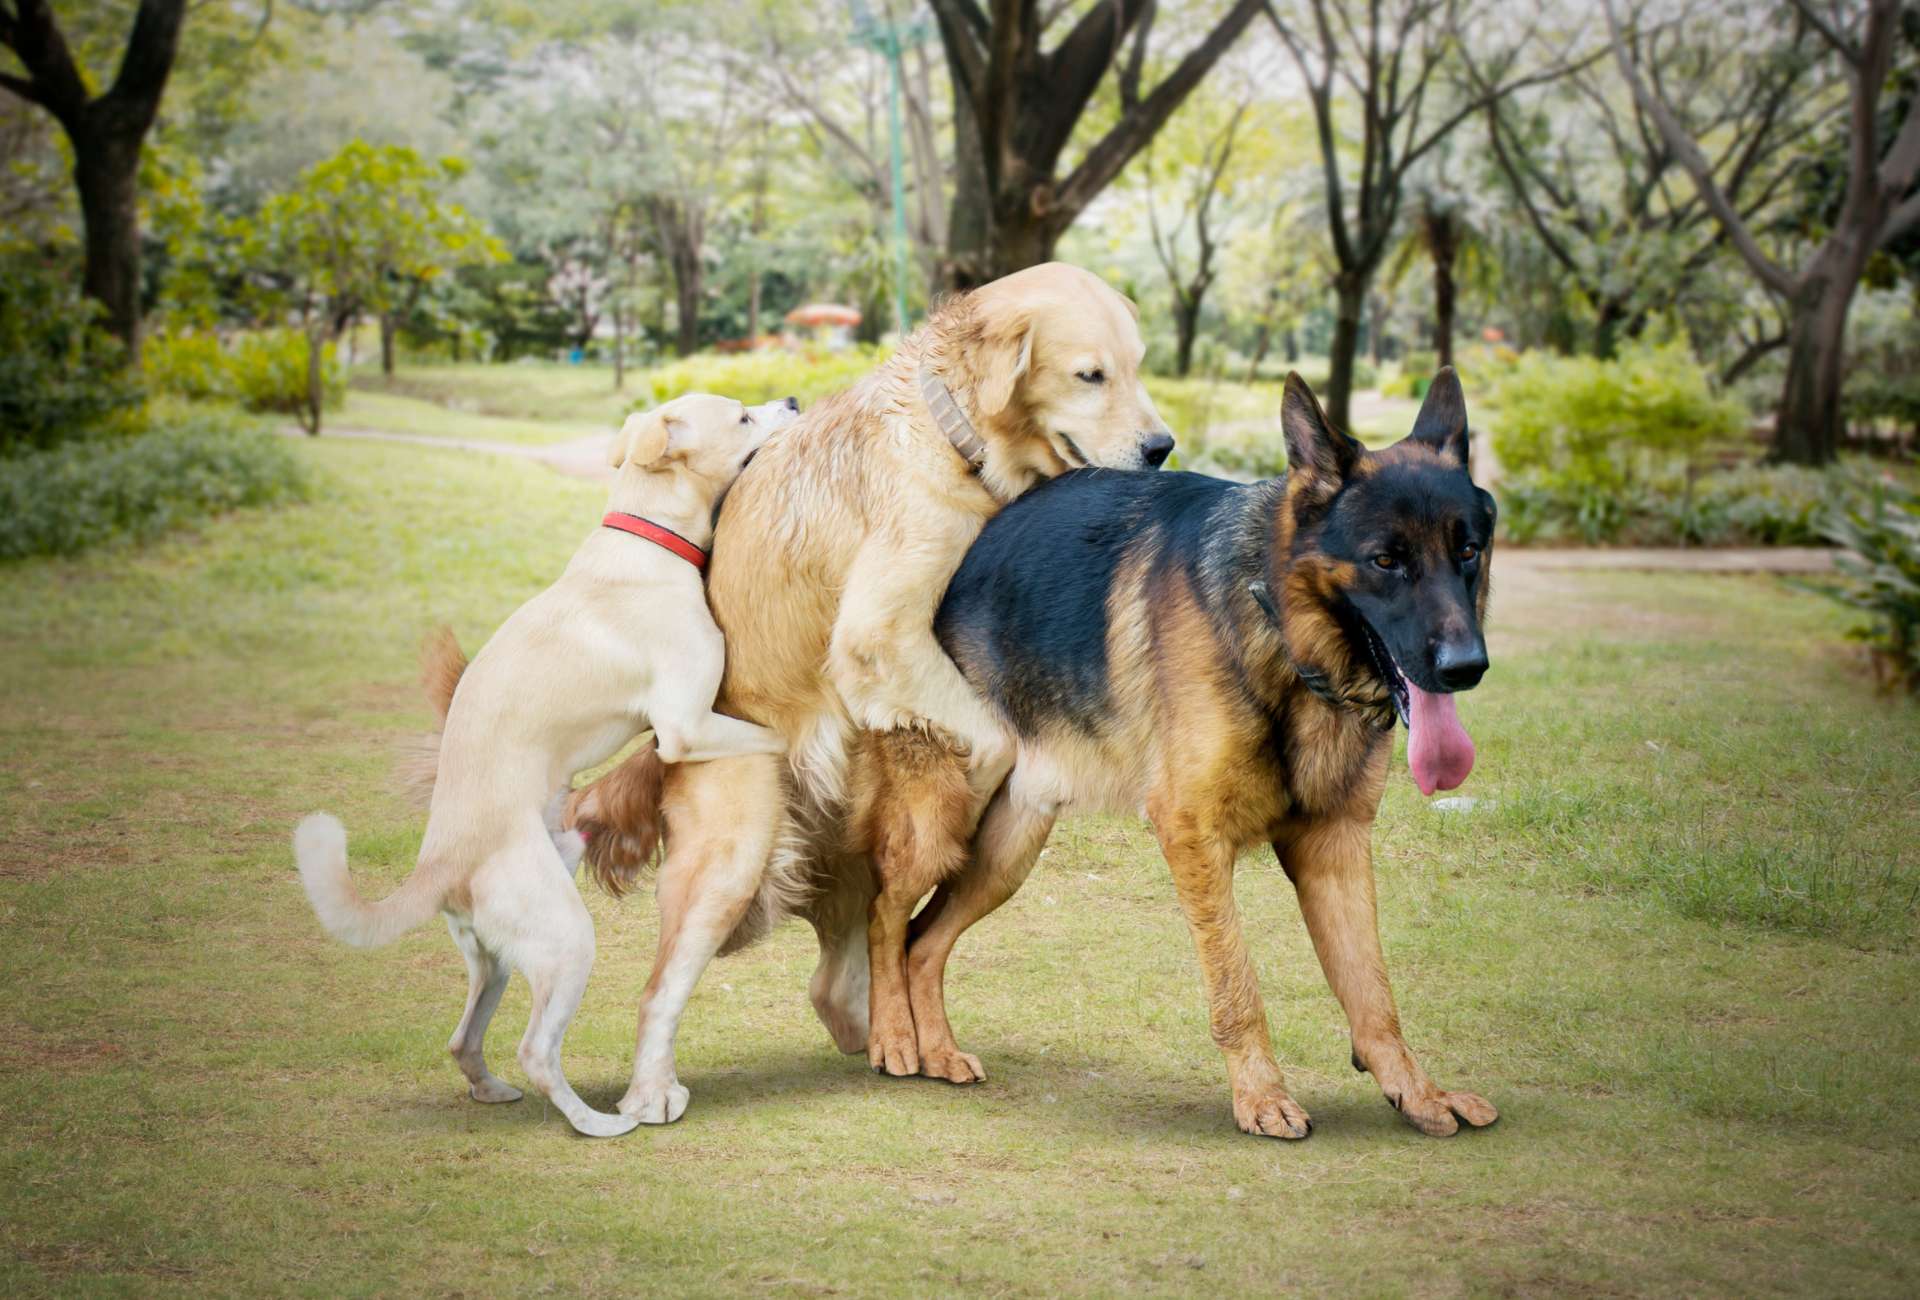 Three dogs are mounting each other in a park.